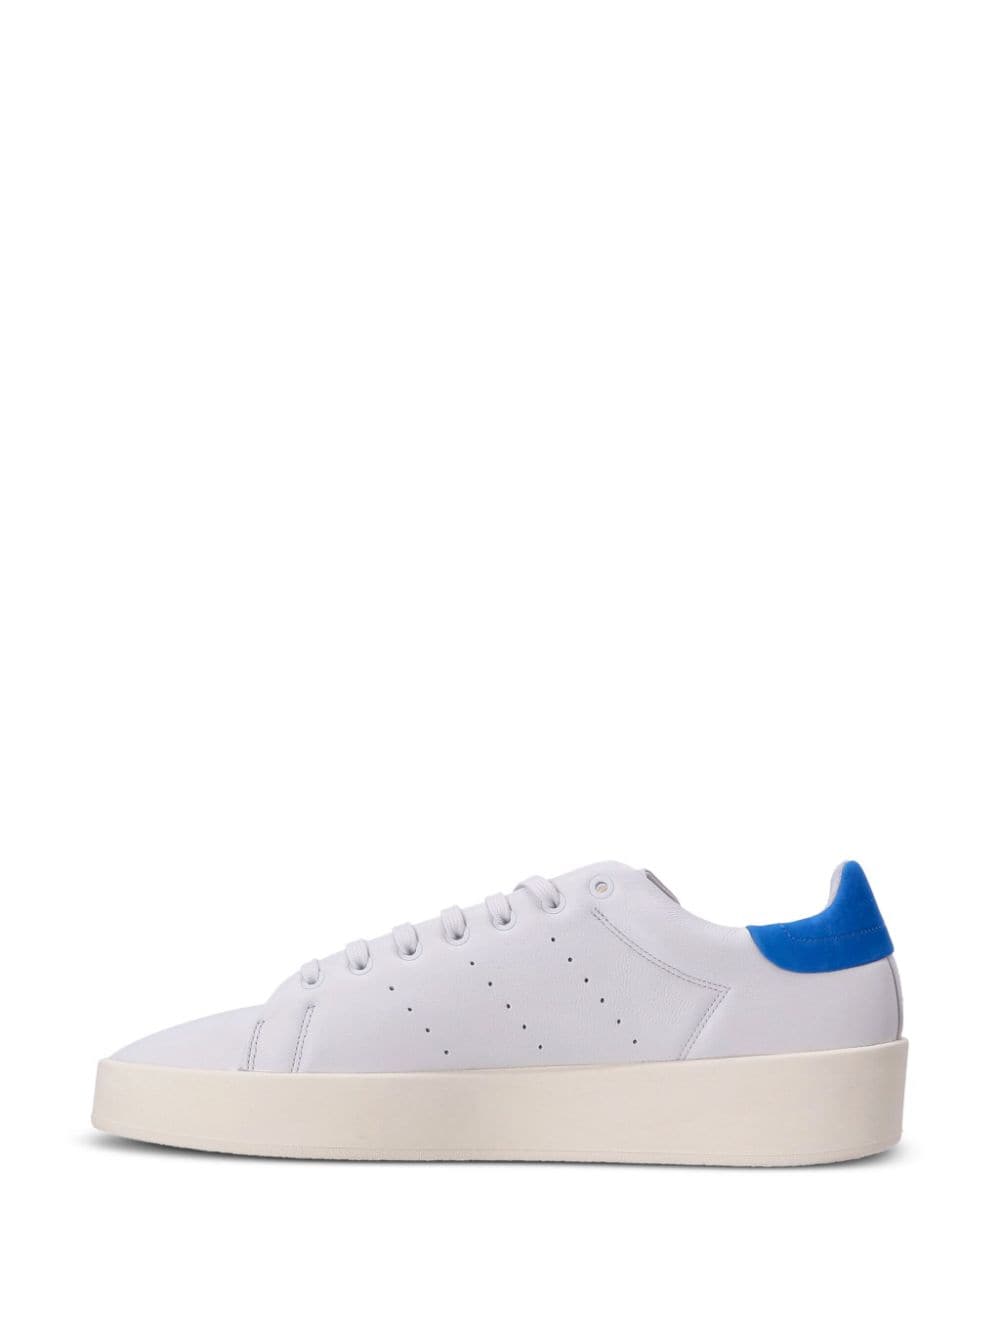 STAN SMITH RELASTED 皮质板鞋